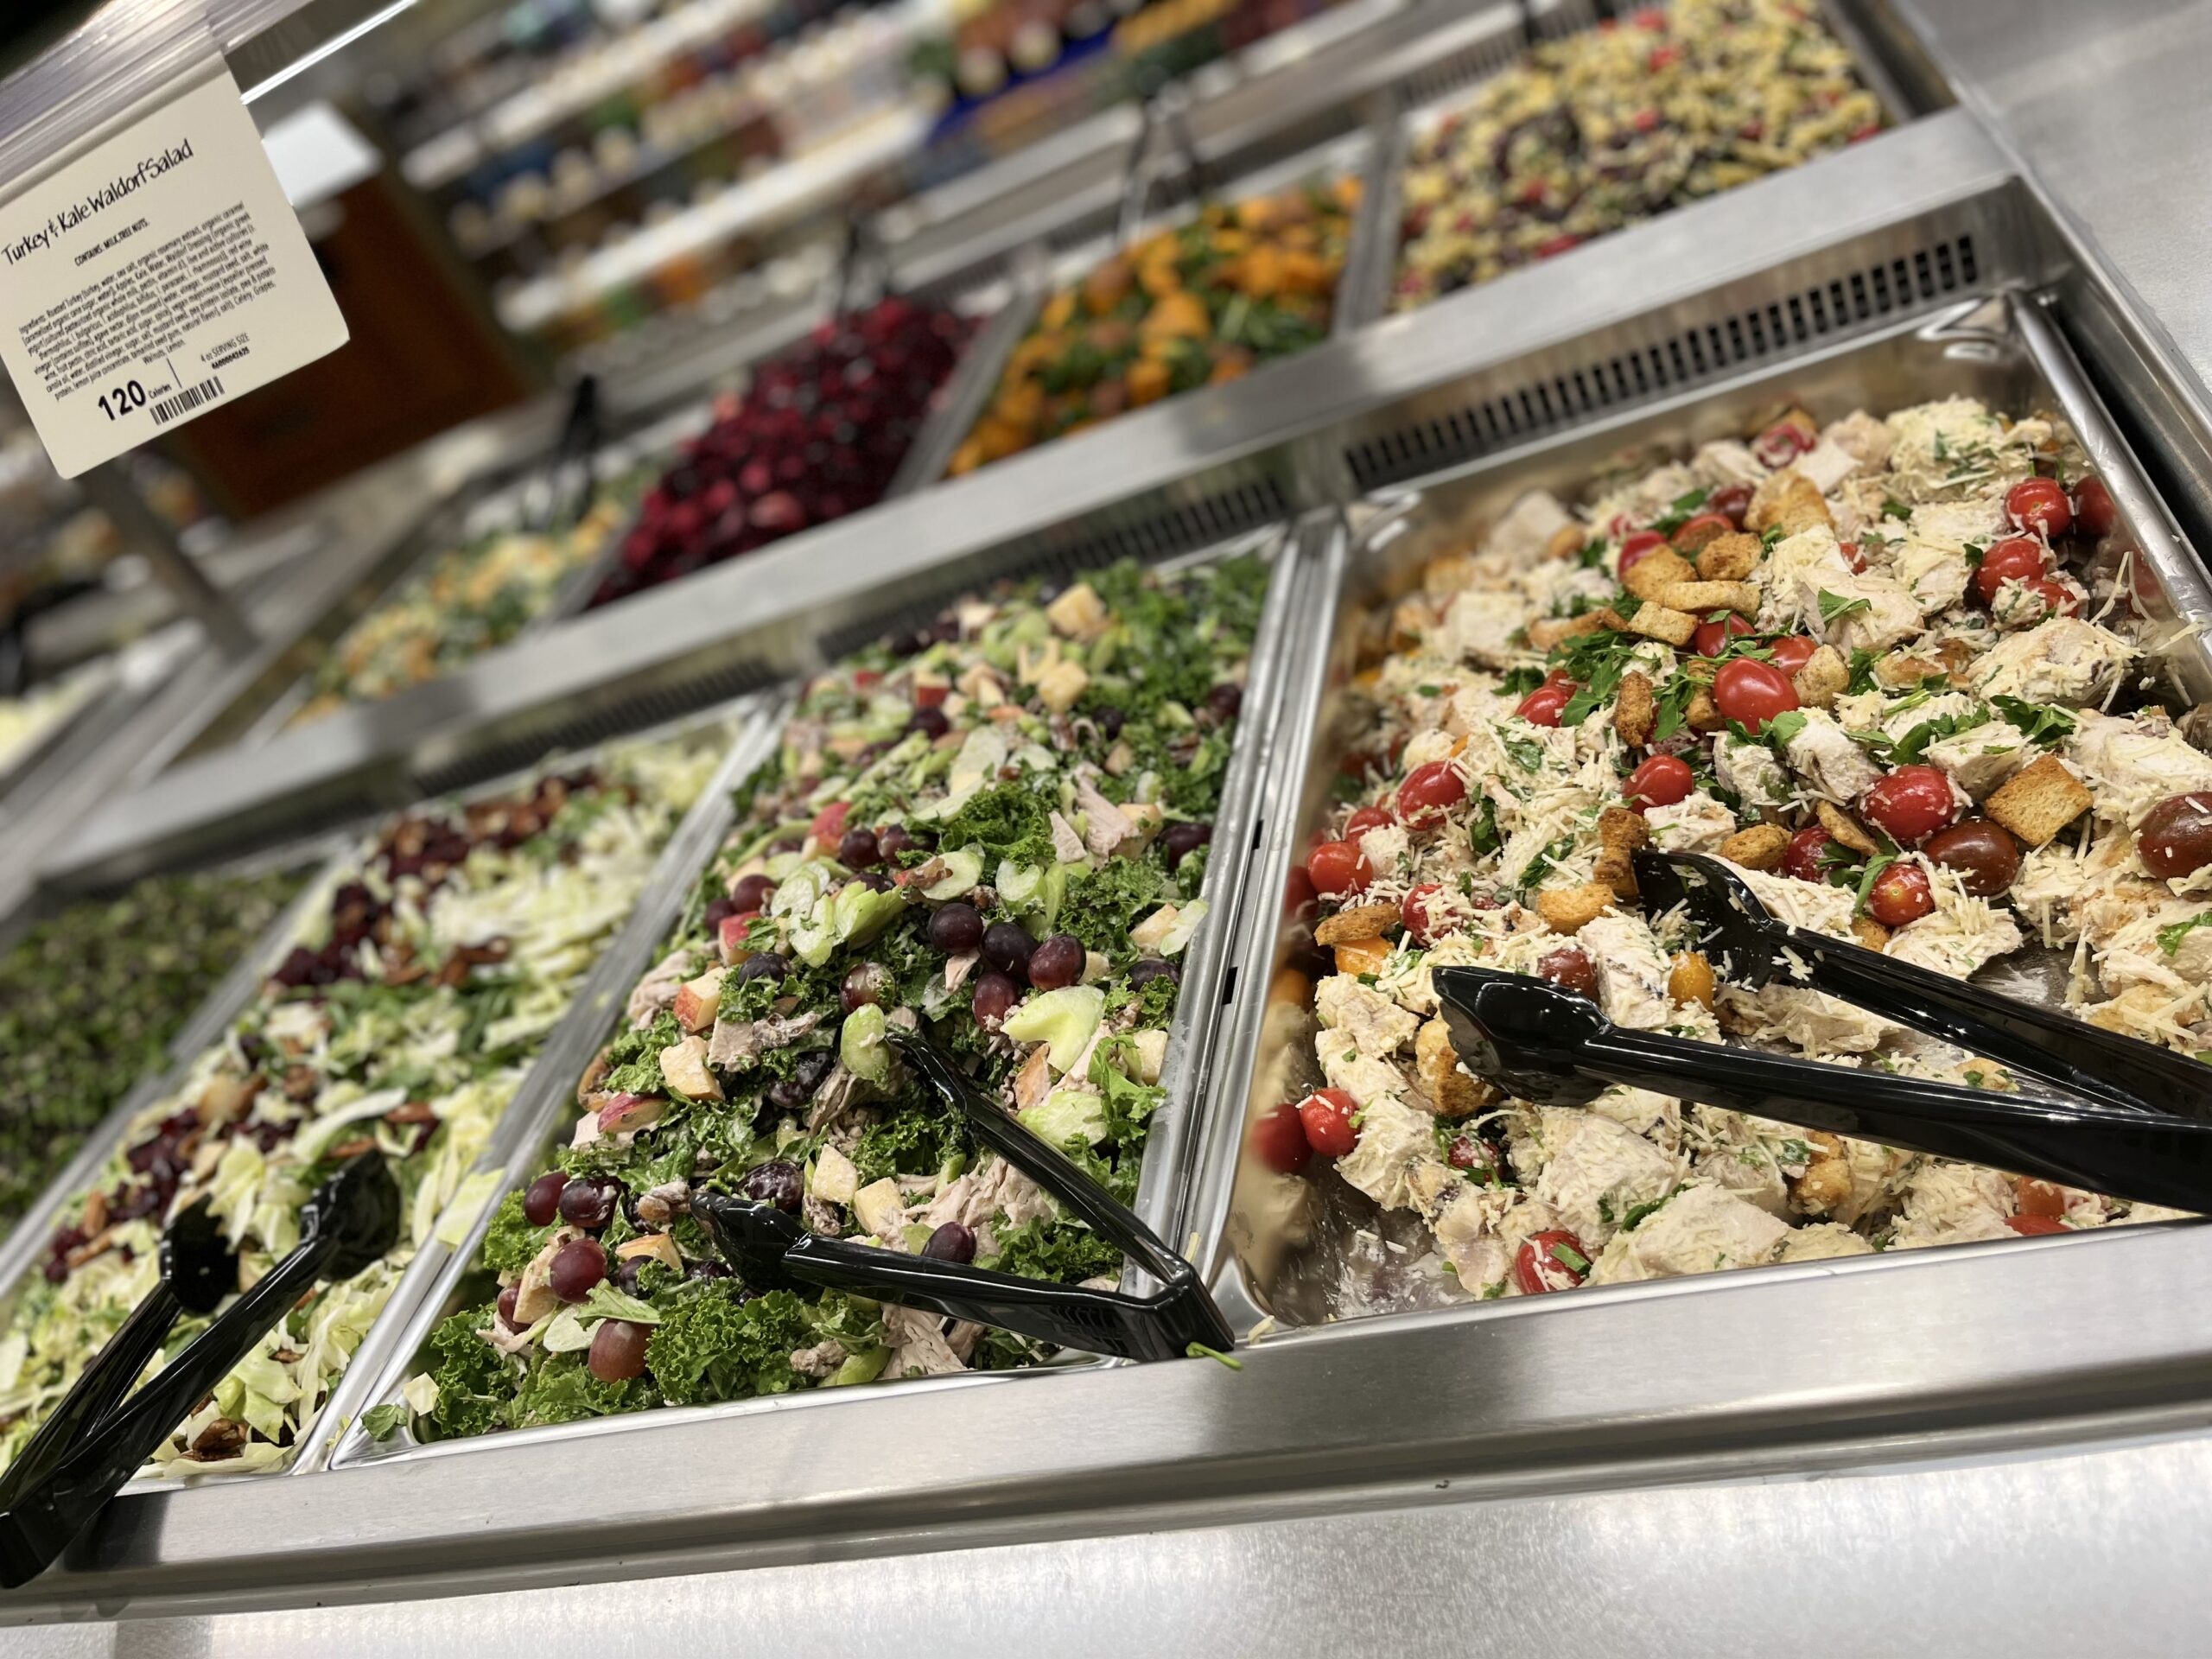 Four Must-Have Lunchtime Options at the Whole Foods in One Wall